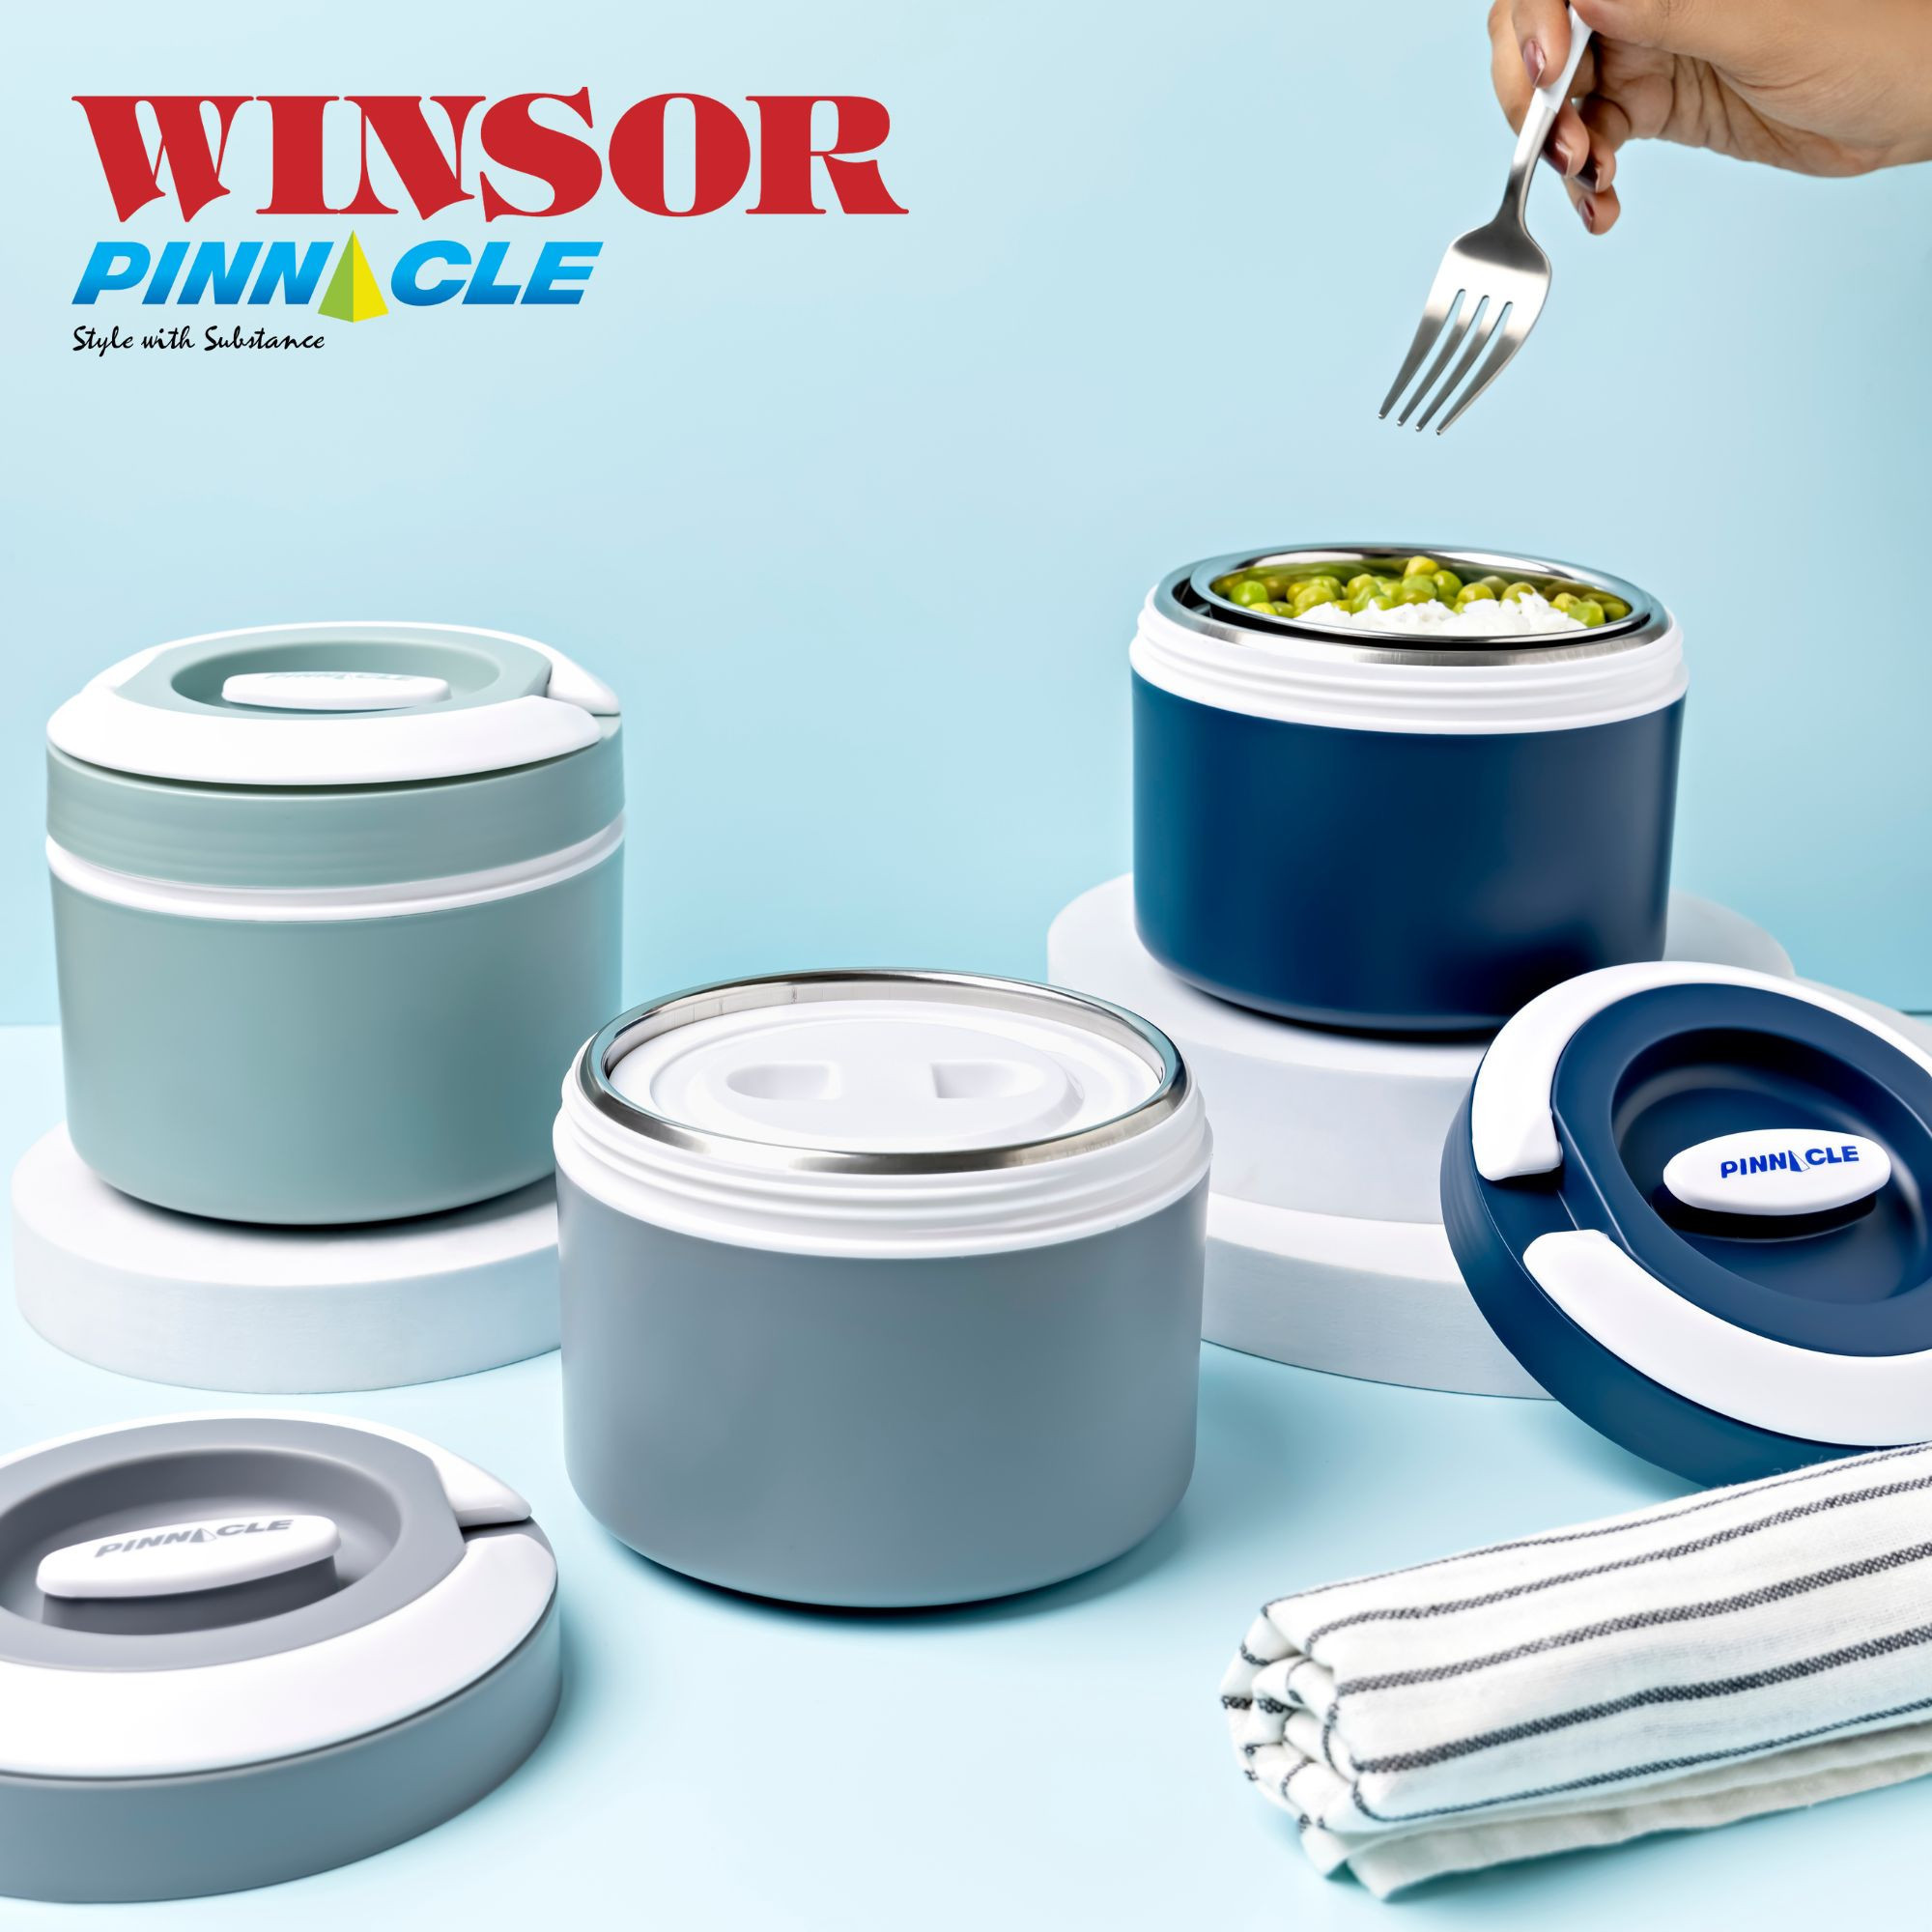 Winsor Pinnacle Prime Lunch Box 600Ml with Assorted Color - Blue | Grey | Green.